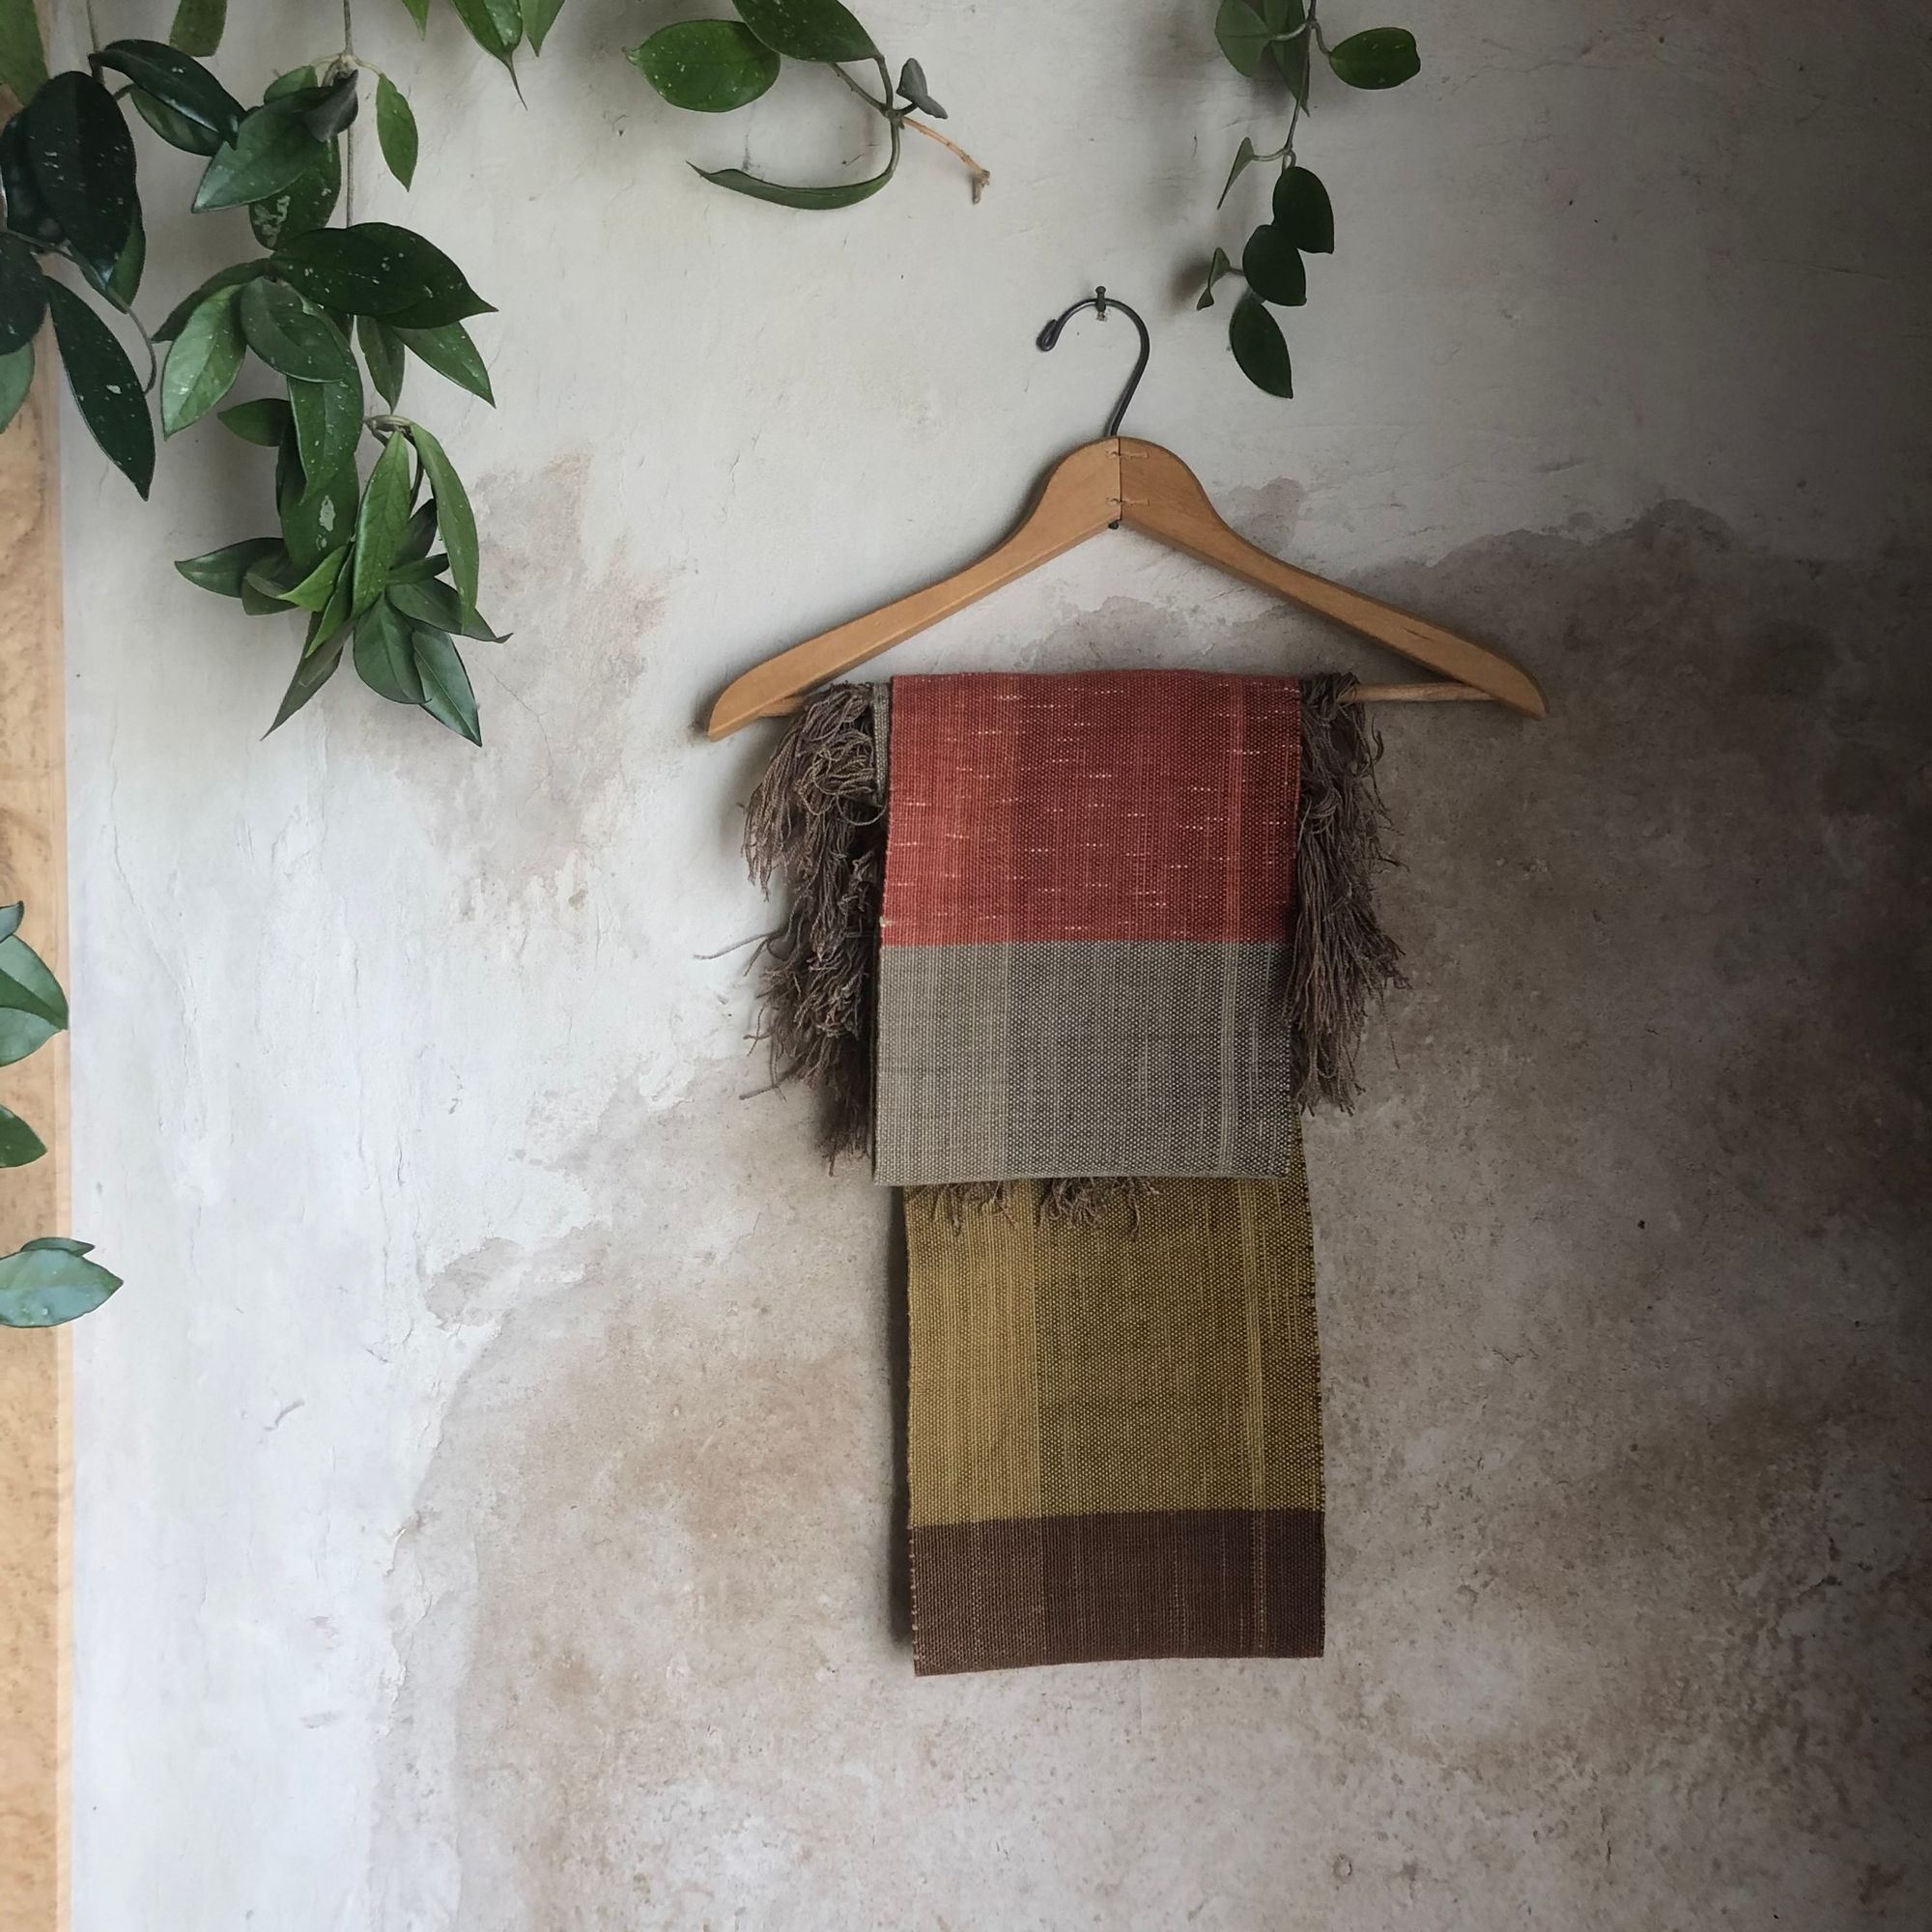 handwoven highly textured scarf that is mustard, brown, grey-blue and salmon colored, on a hanger against a wall